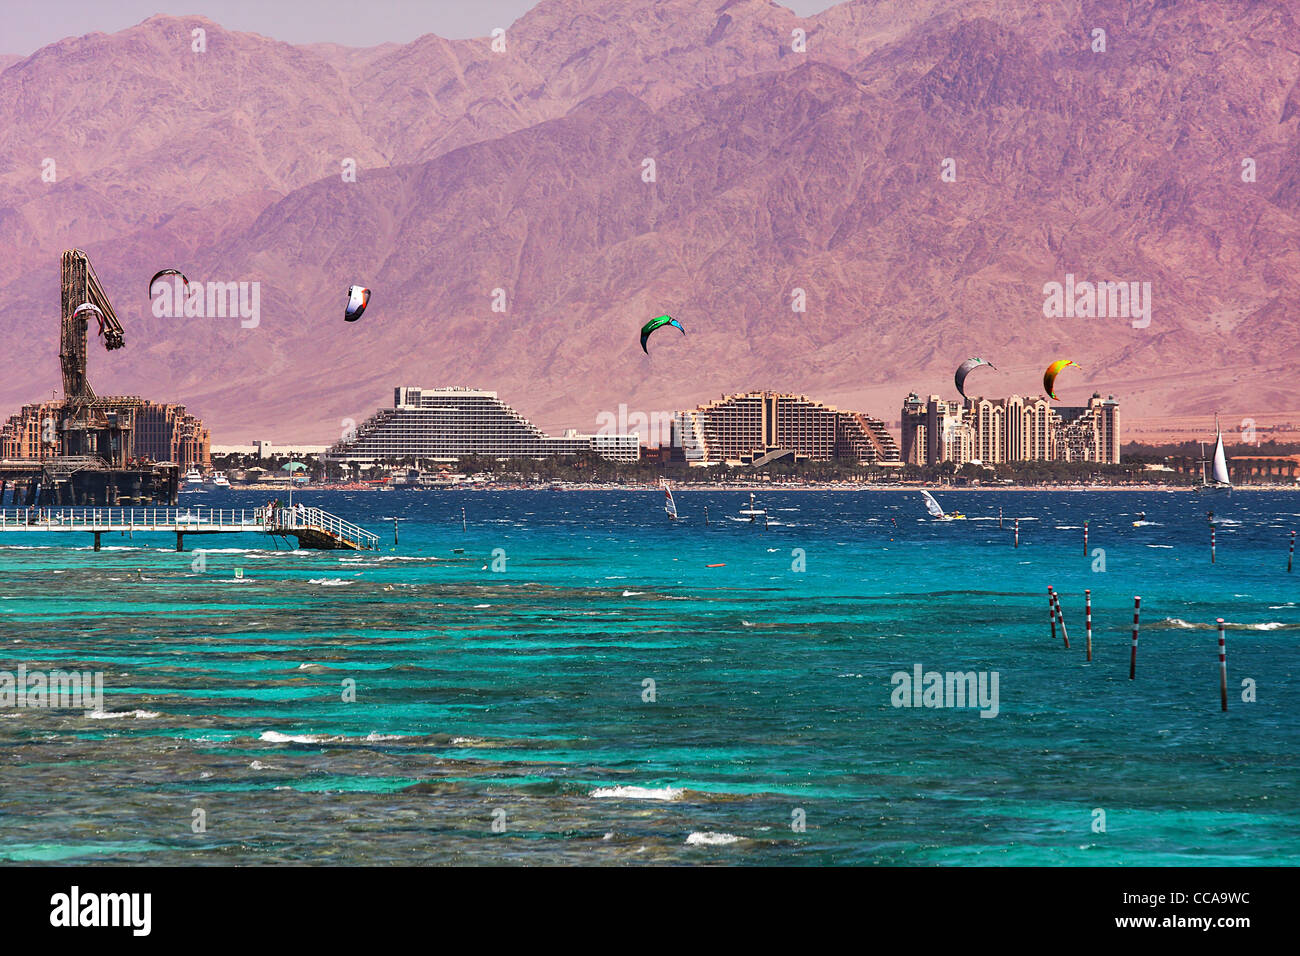 View on coastline with hotels, mountains and bay of Eilat located on Red Sea in Israel. Stock Photo